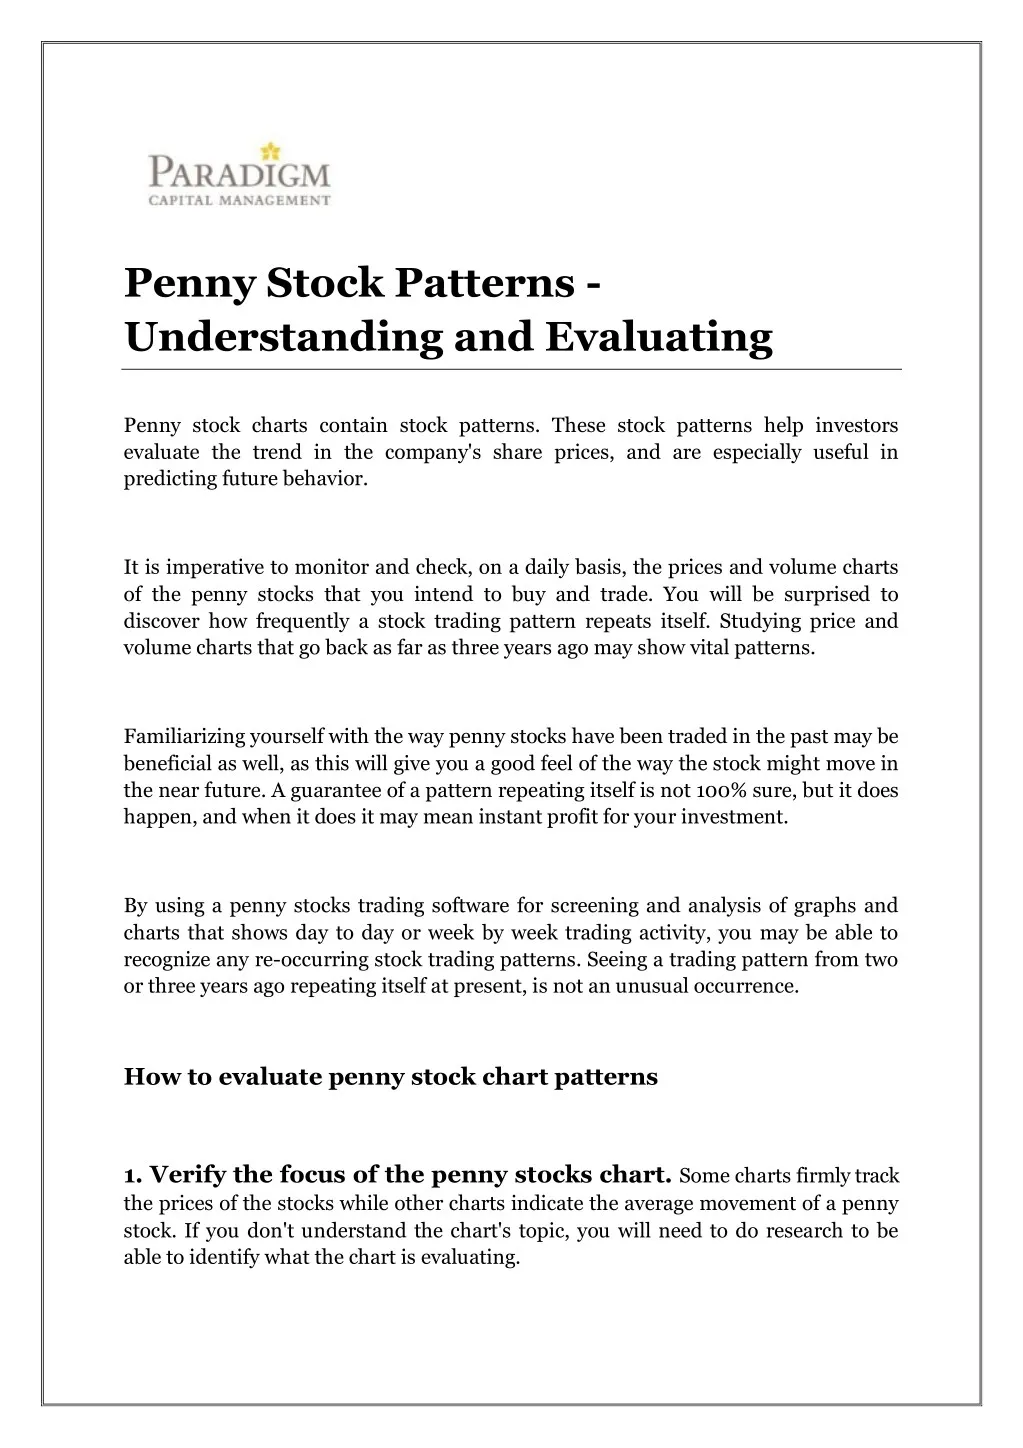 penny stock patterns understanding and evaluating